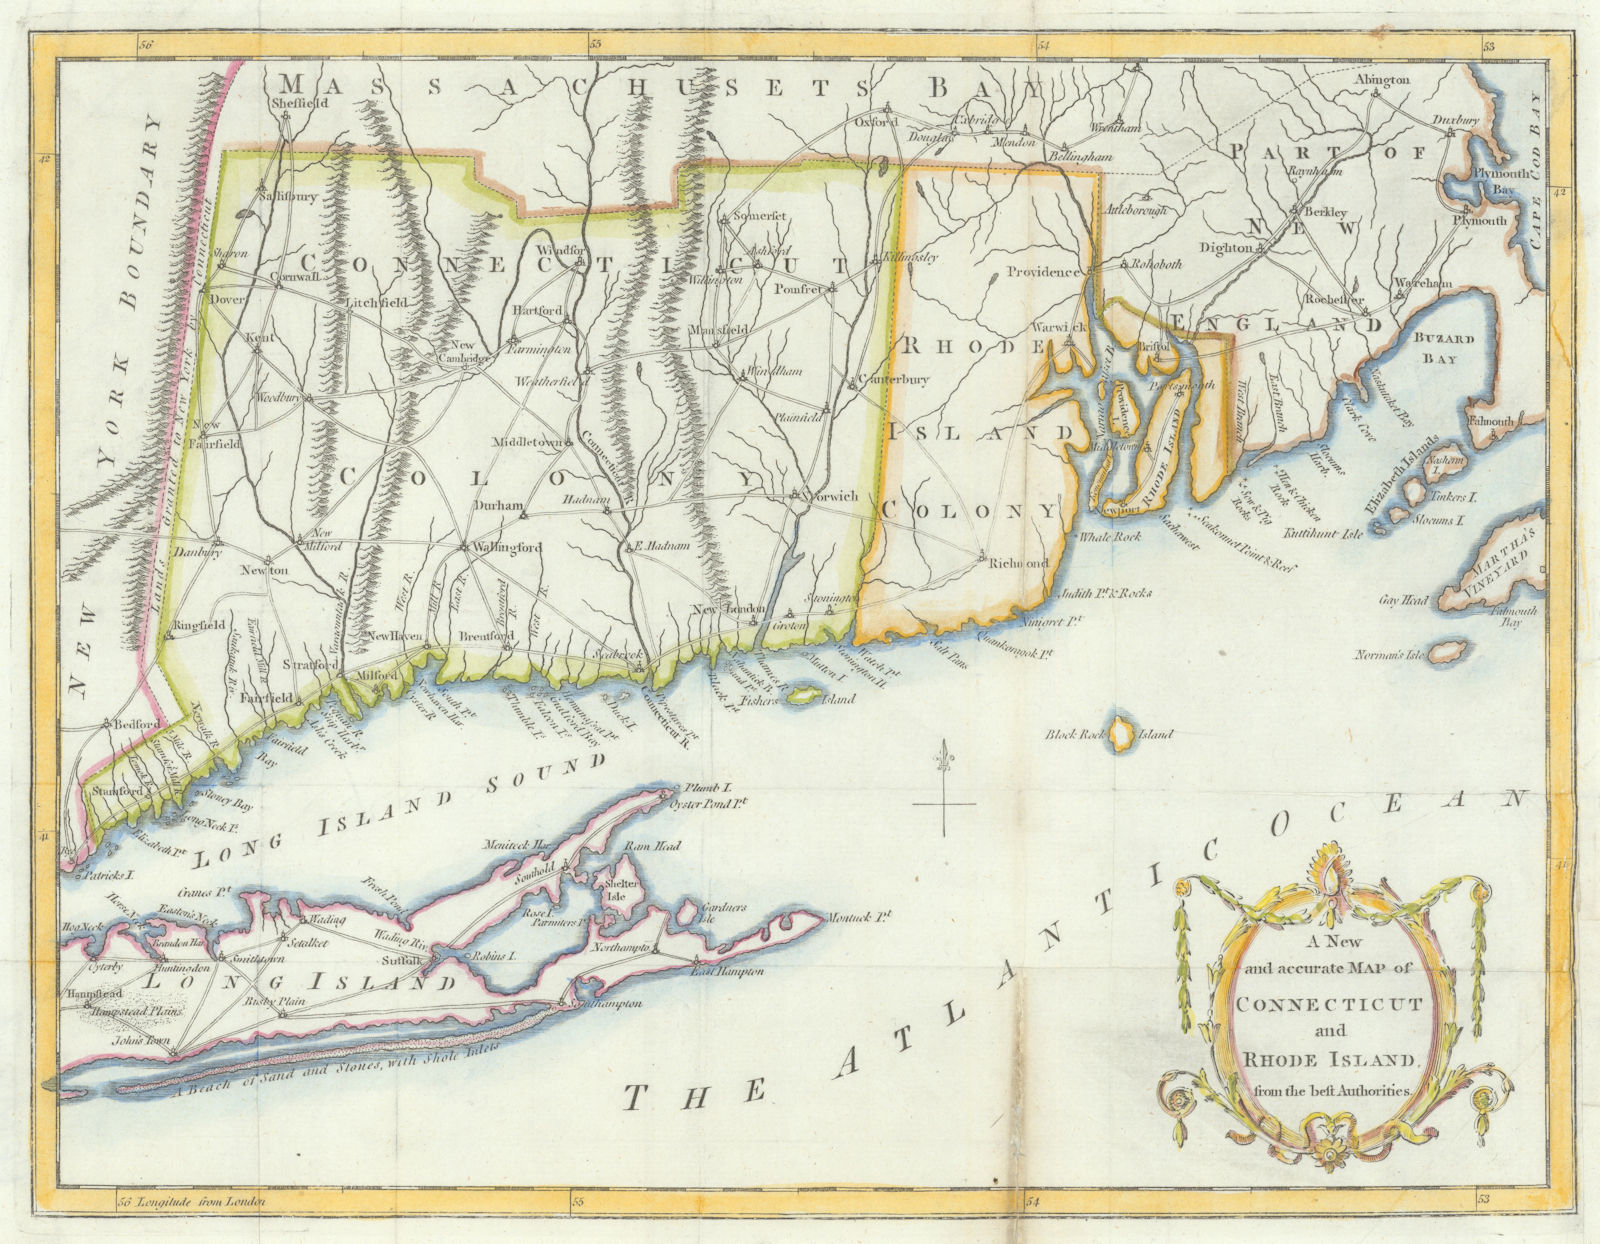 A New and accurate Map of Connecticut and Rhode Island… Universal Magazine 1780